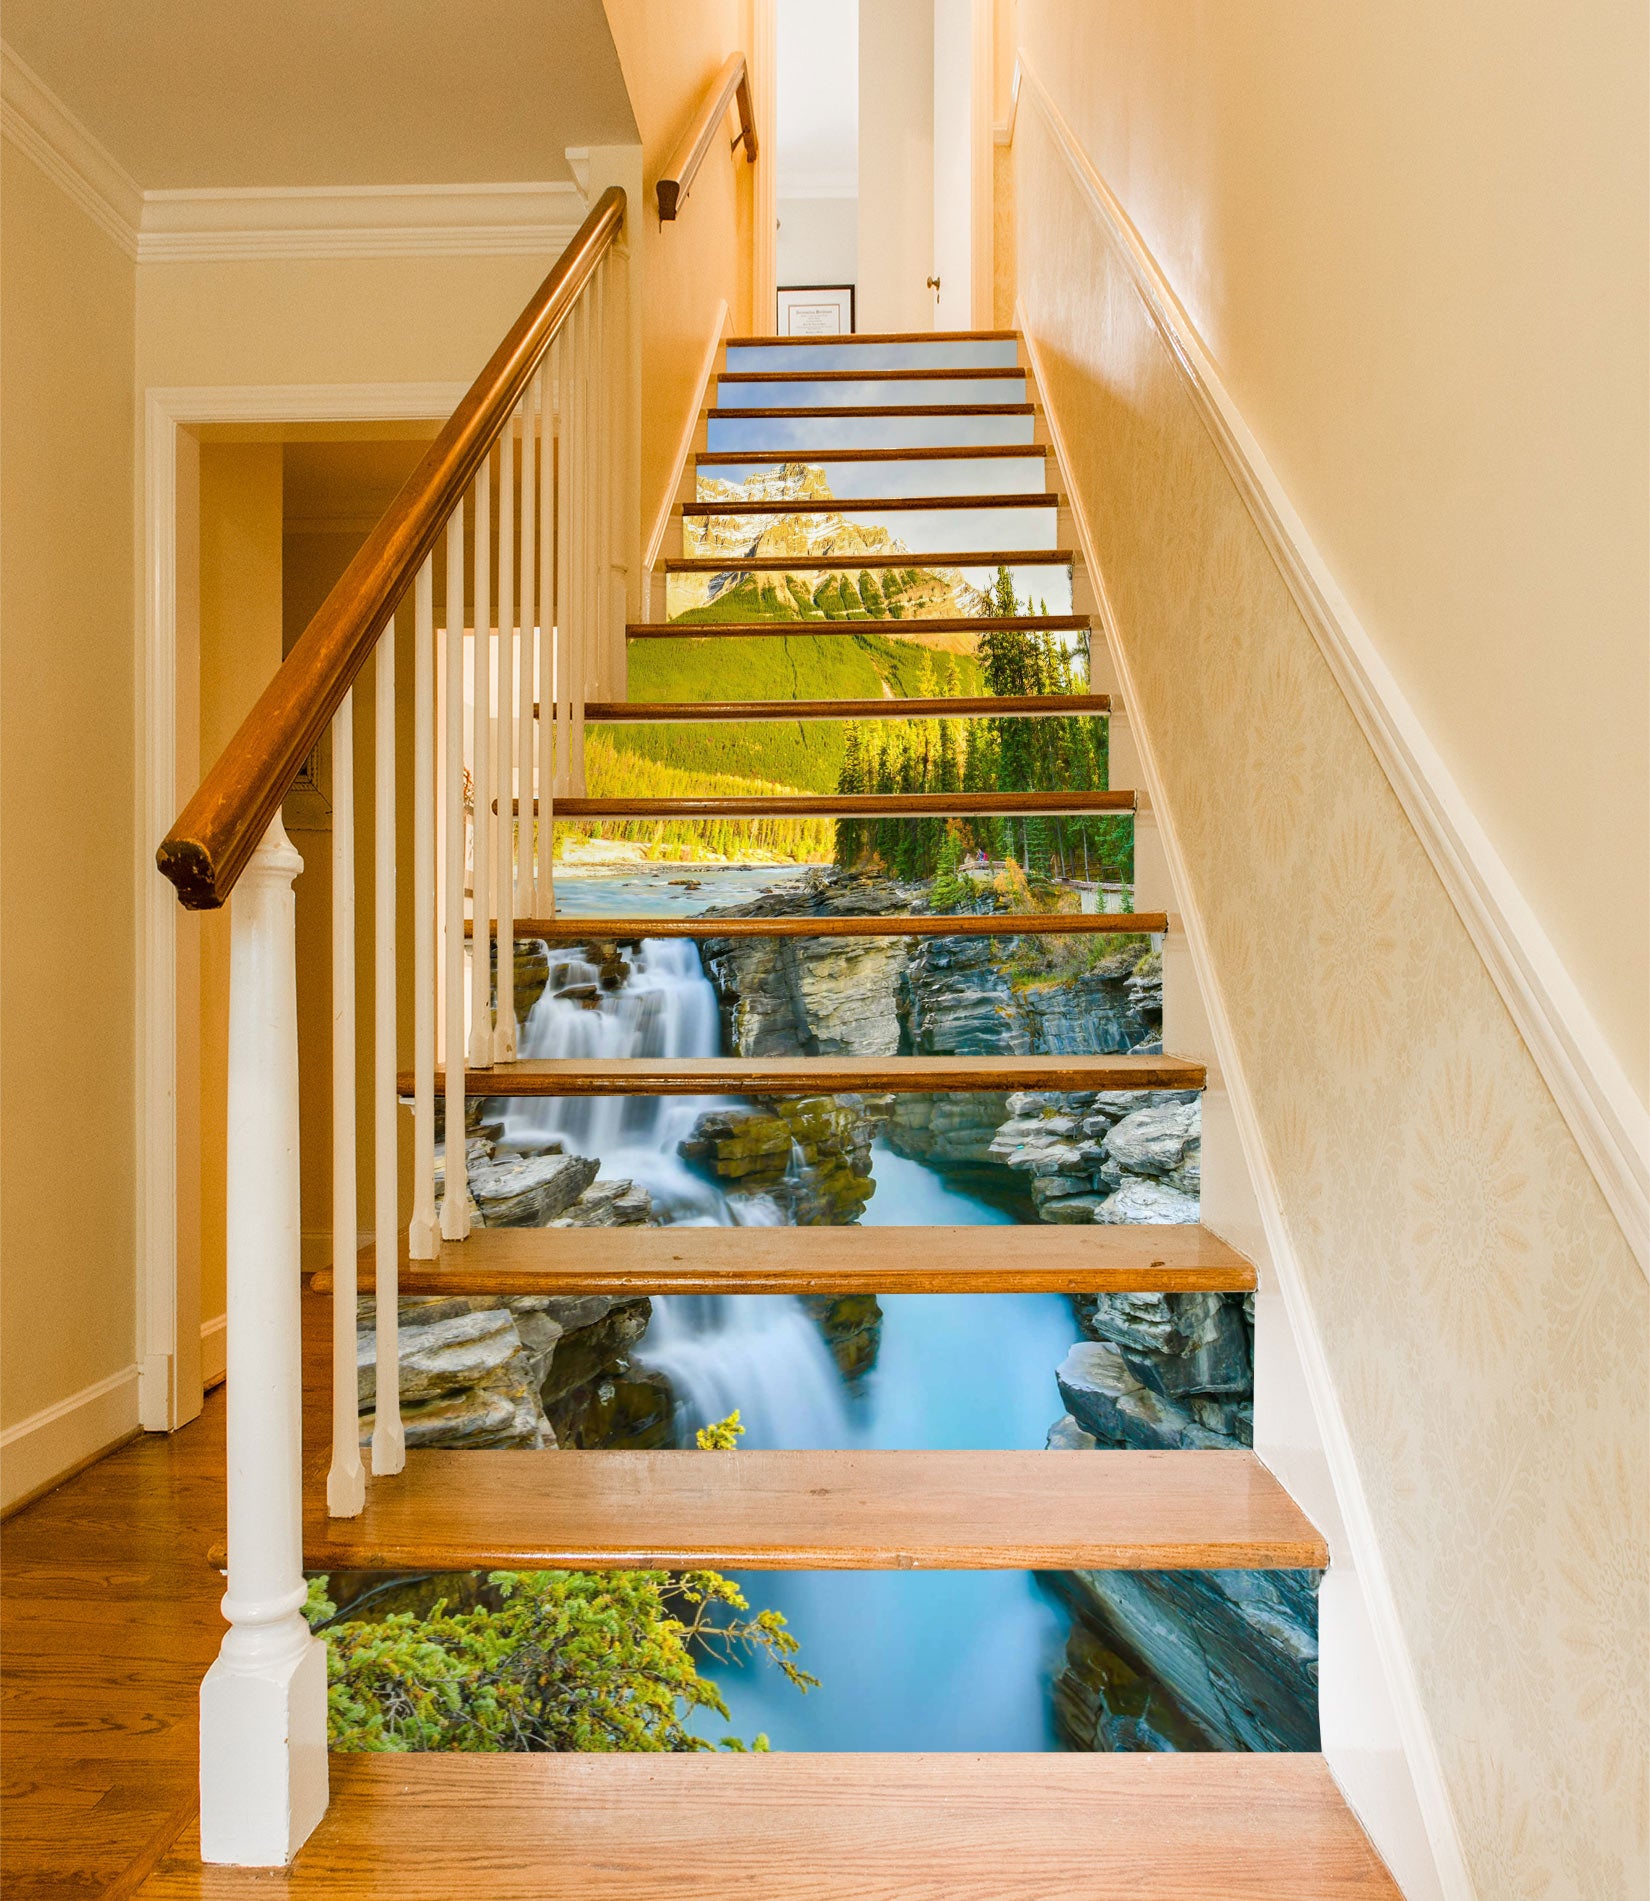 3D Charming Mountain Scenery 344 Stair Risers